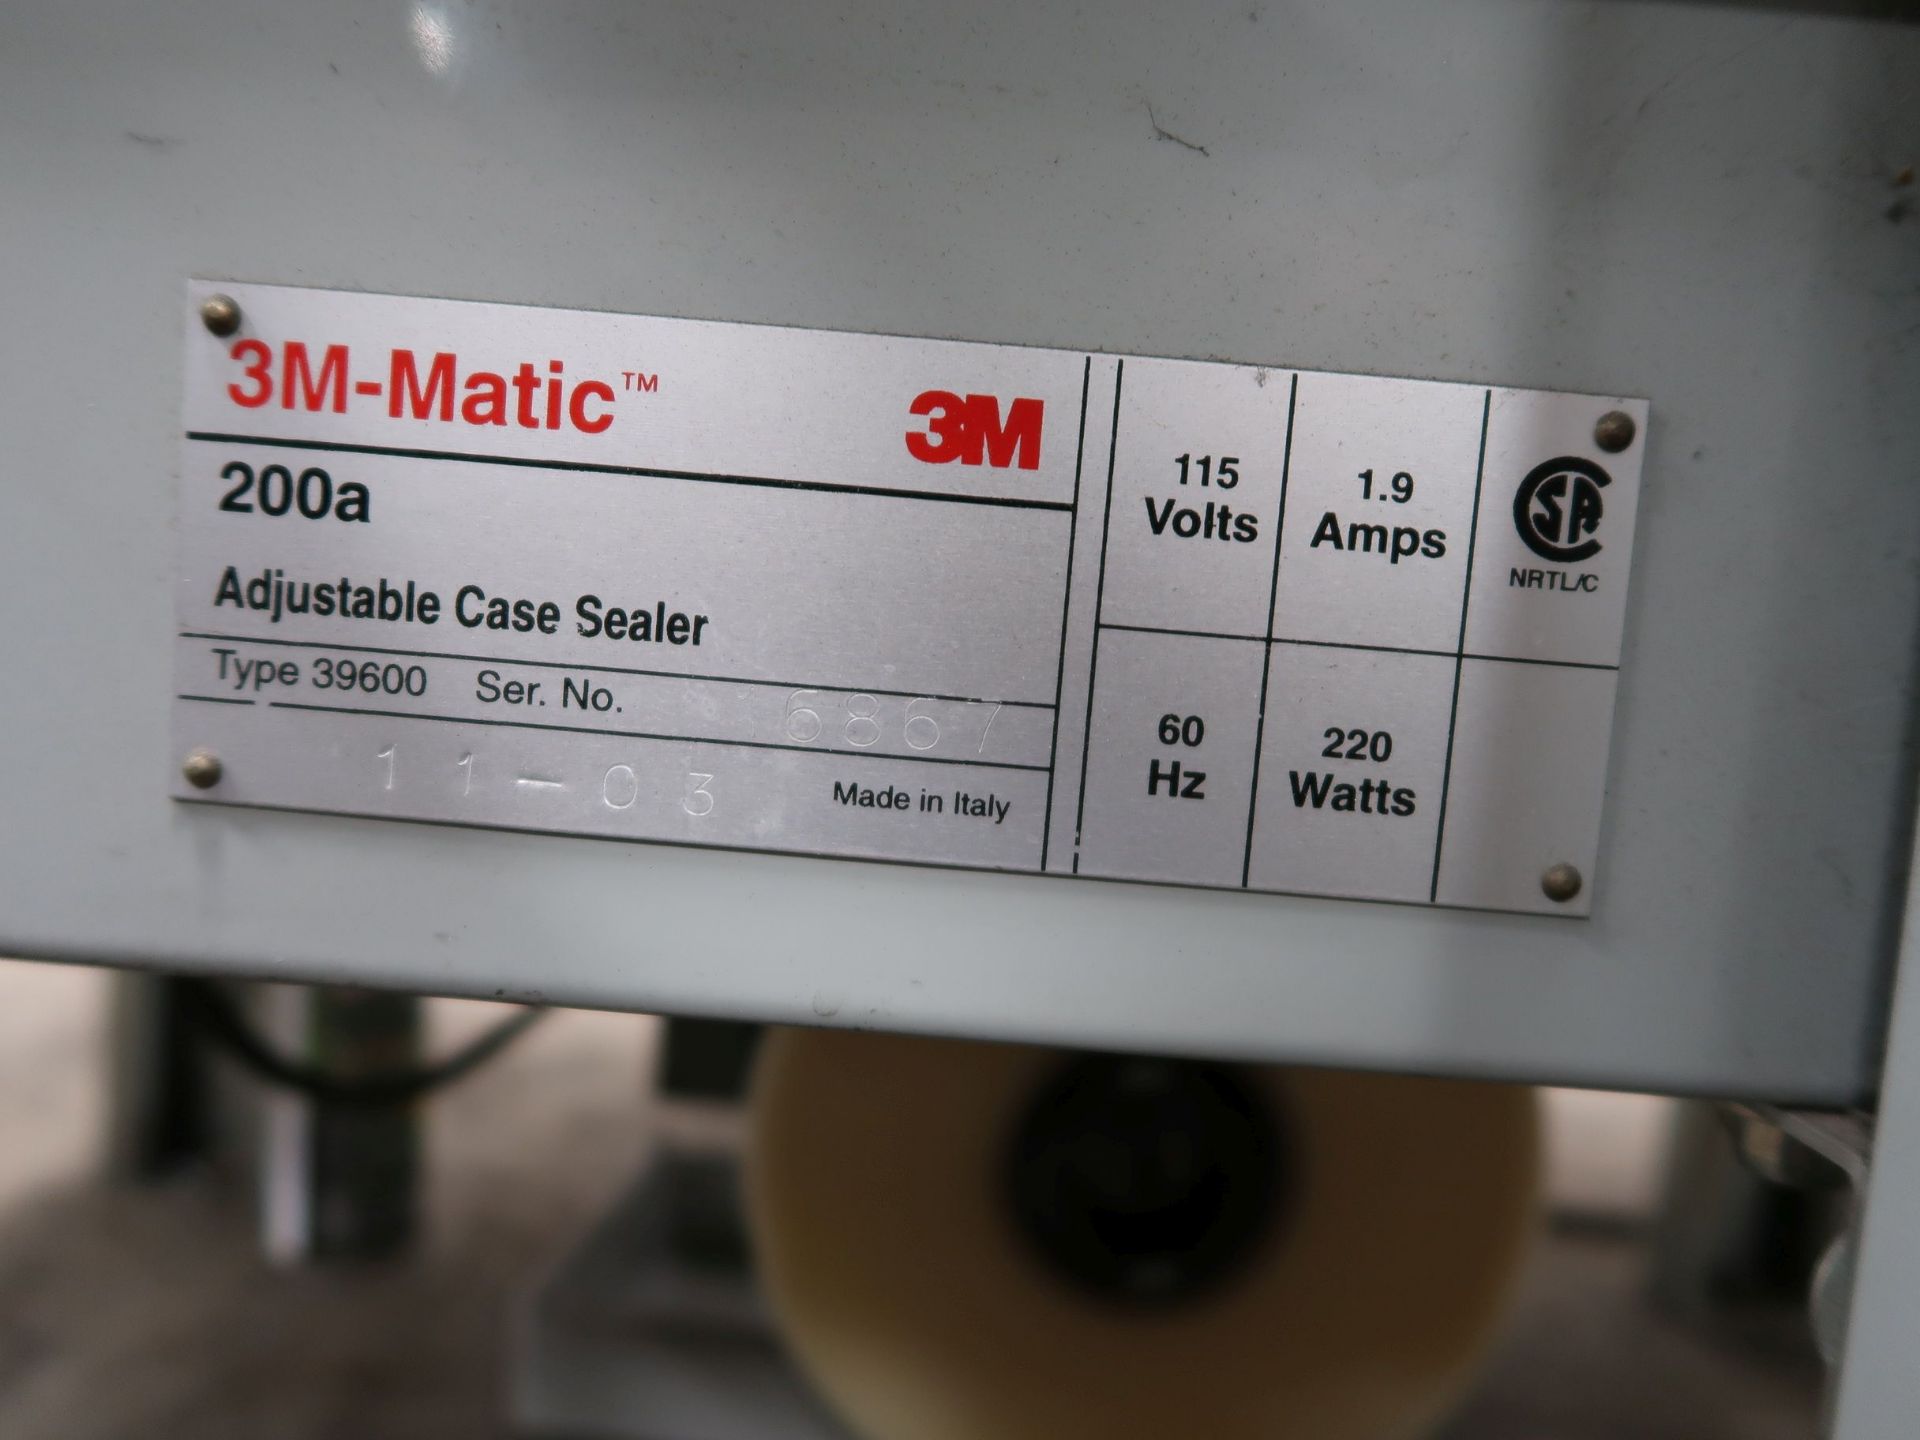 3M MODEL 200 A ADJUSTABLE CASE SEALER; S/N 16867, WITH VARIOUS SIZE AND STYLE MANUAL CONVEYOR ** - Image 4 of 4